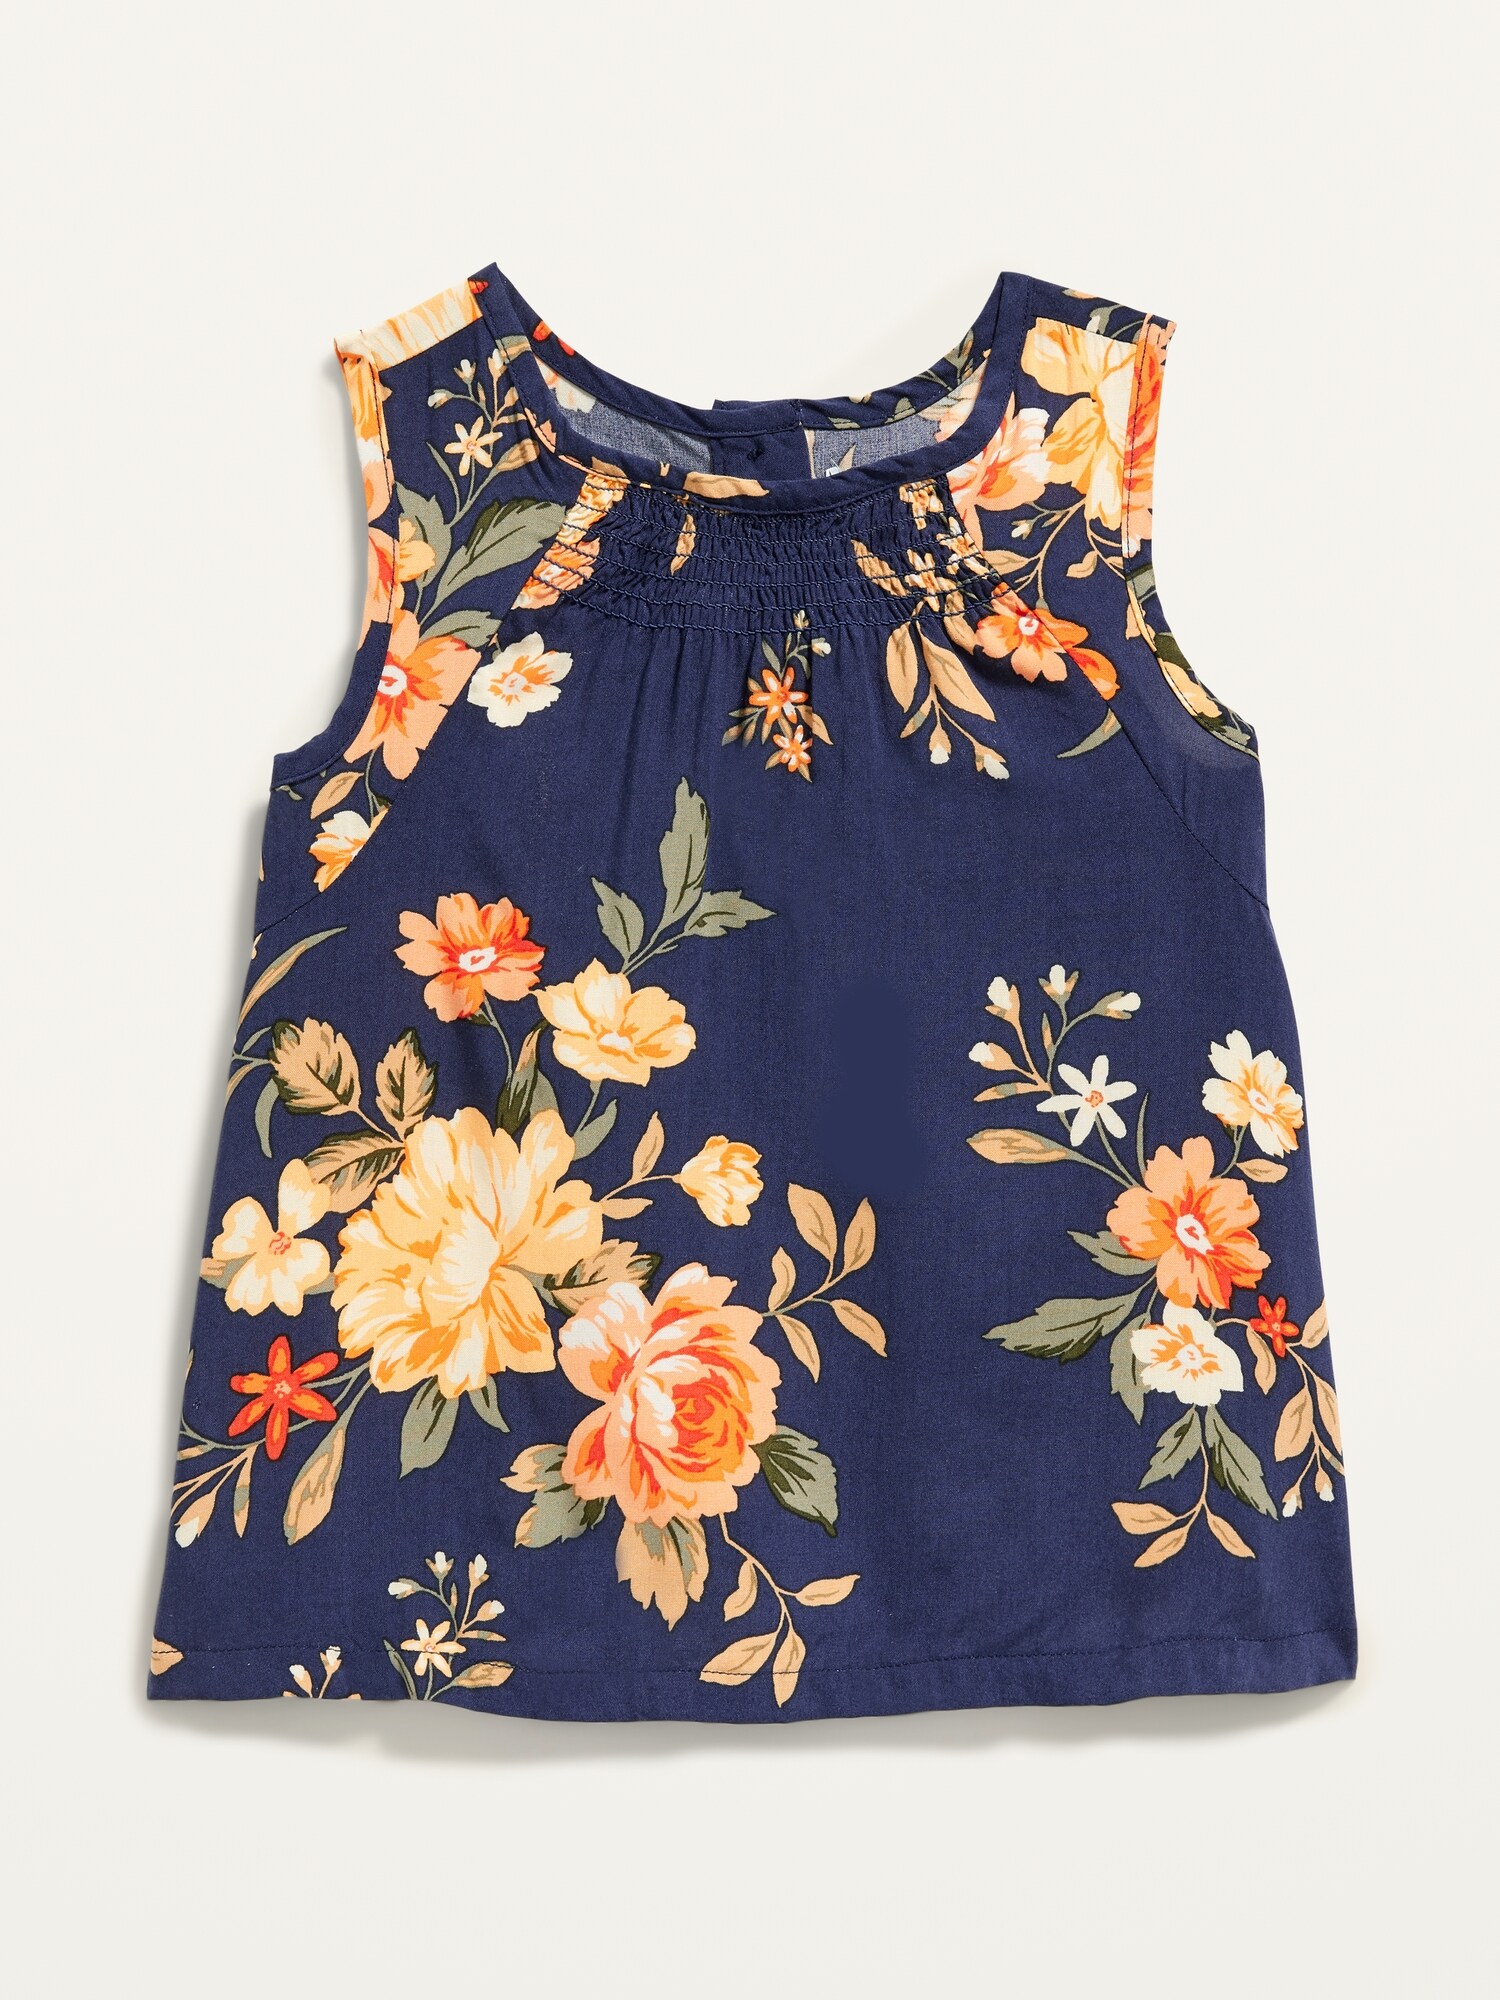 Sleeveless Floral A-Line Top for Toddler Girls | Old Navy